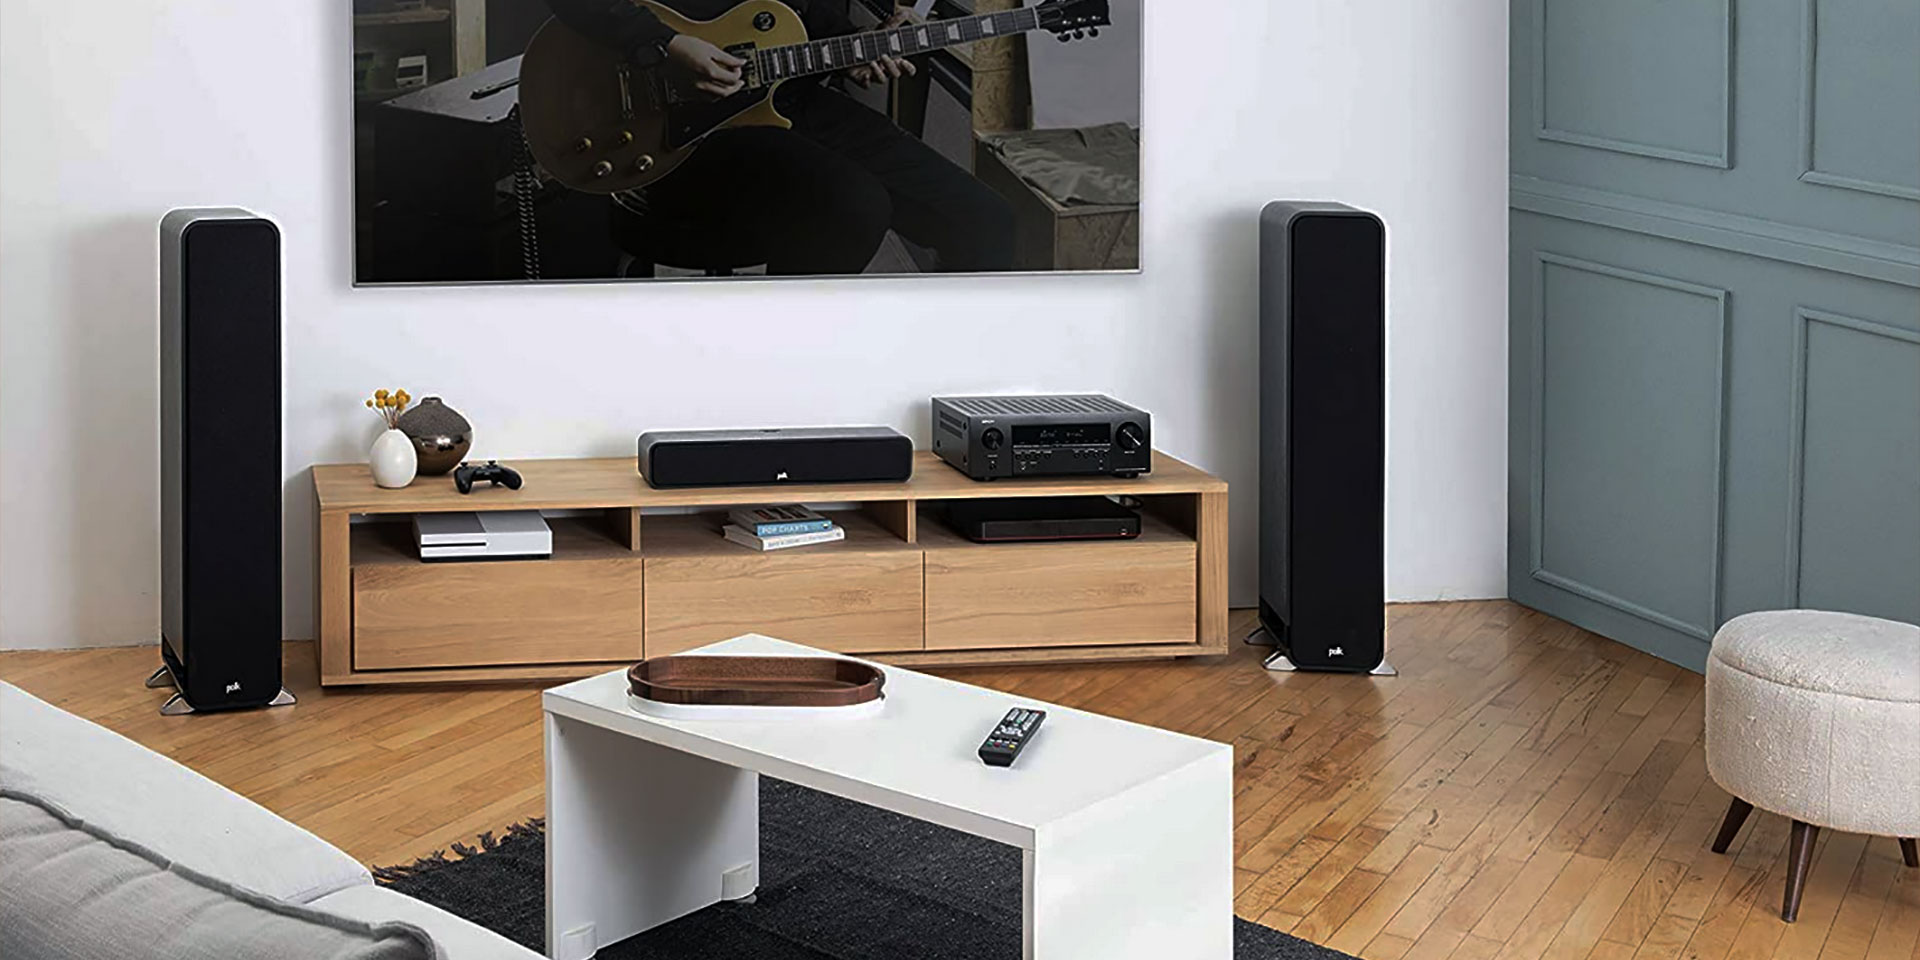 Connect Wireless Speakers To Stereo Receiver?